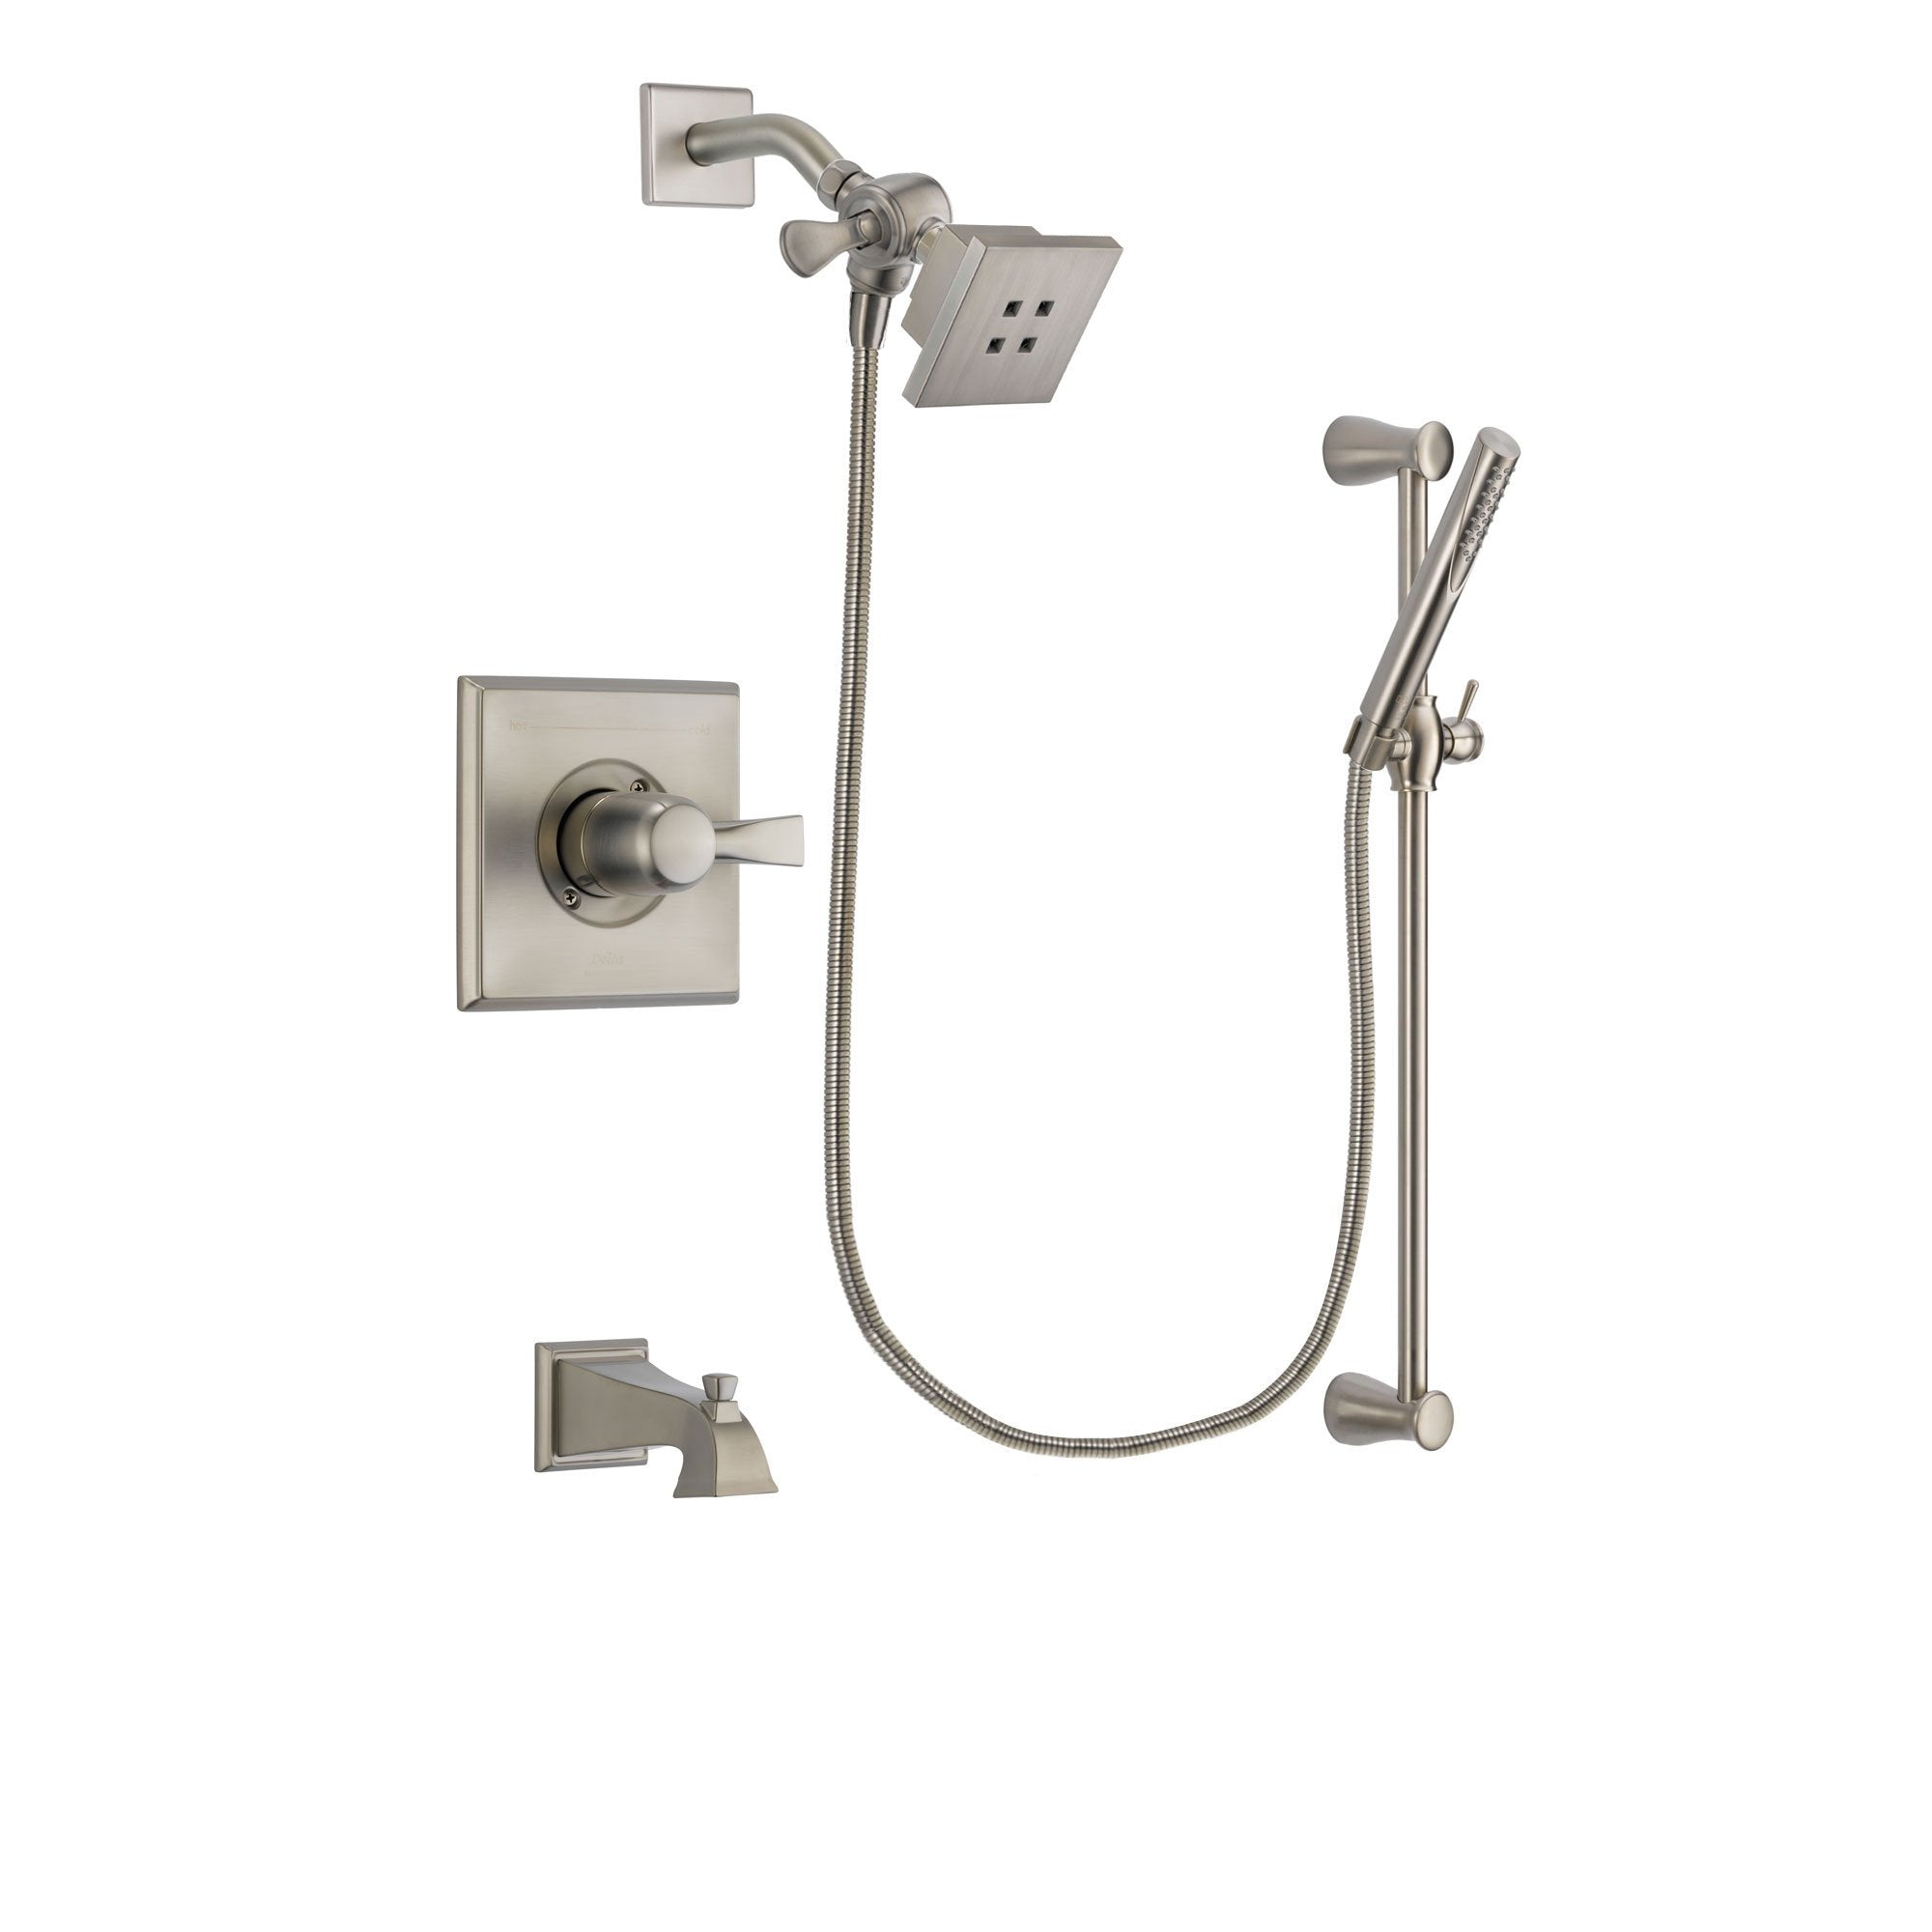 Delta Dryden Stainless Steel Finish Tub and Shower Faucet System Package with Square Showerhead and Handheld Shower Spray with Slide Bar Includes Rough-in Valve and Tub Spout DSP2279V